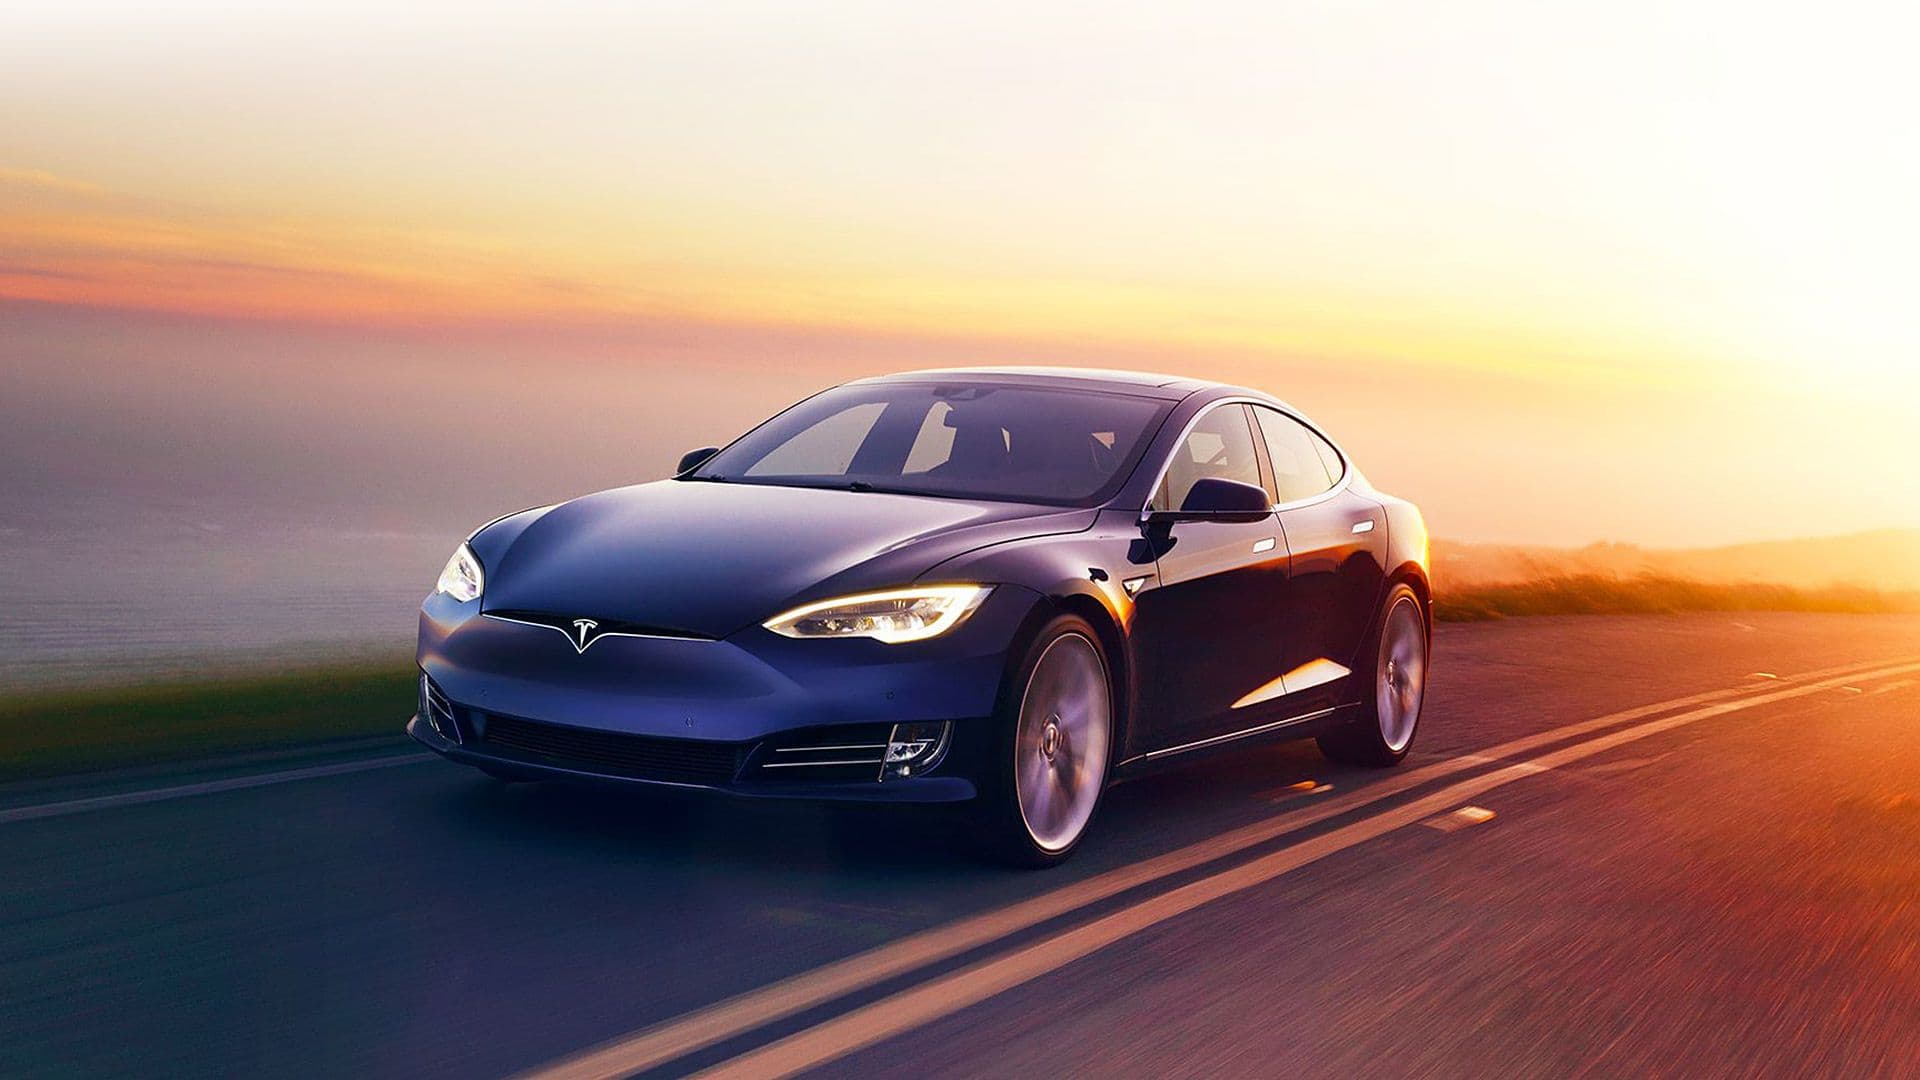 Cops Chase Tesla Model S for 7 Miles, Driver Supposedly Asleep After Drinking Too Much